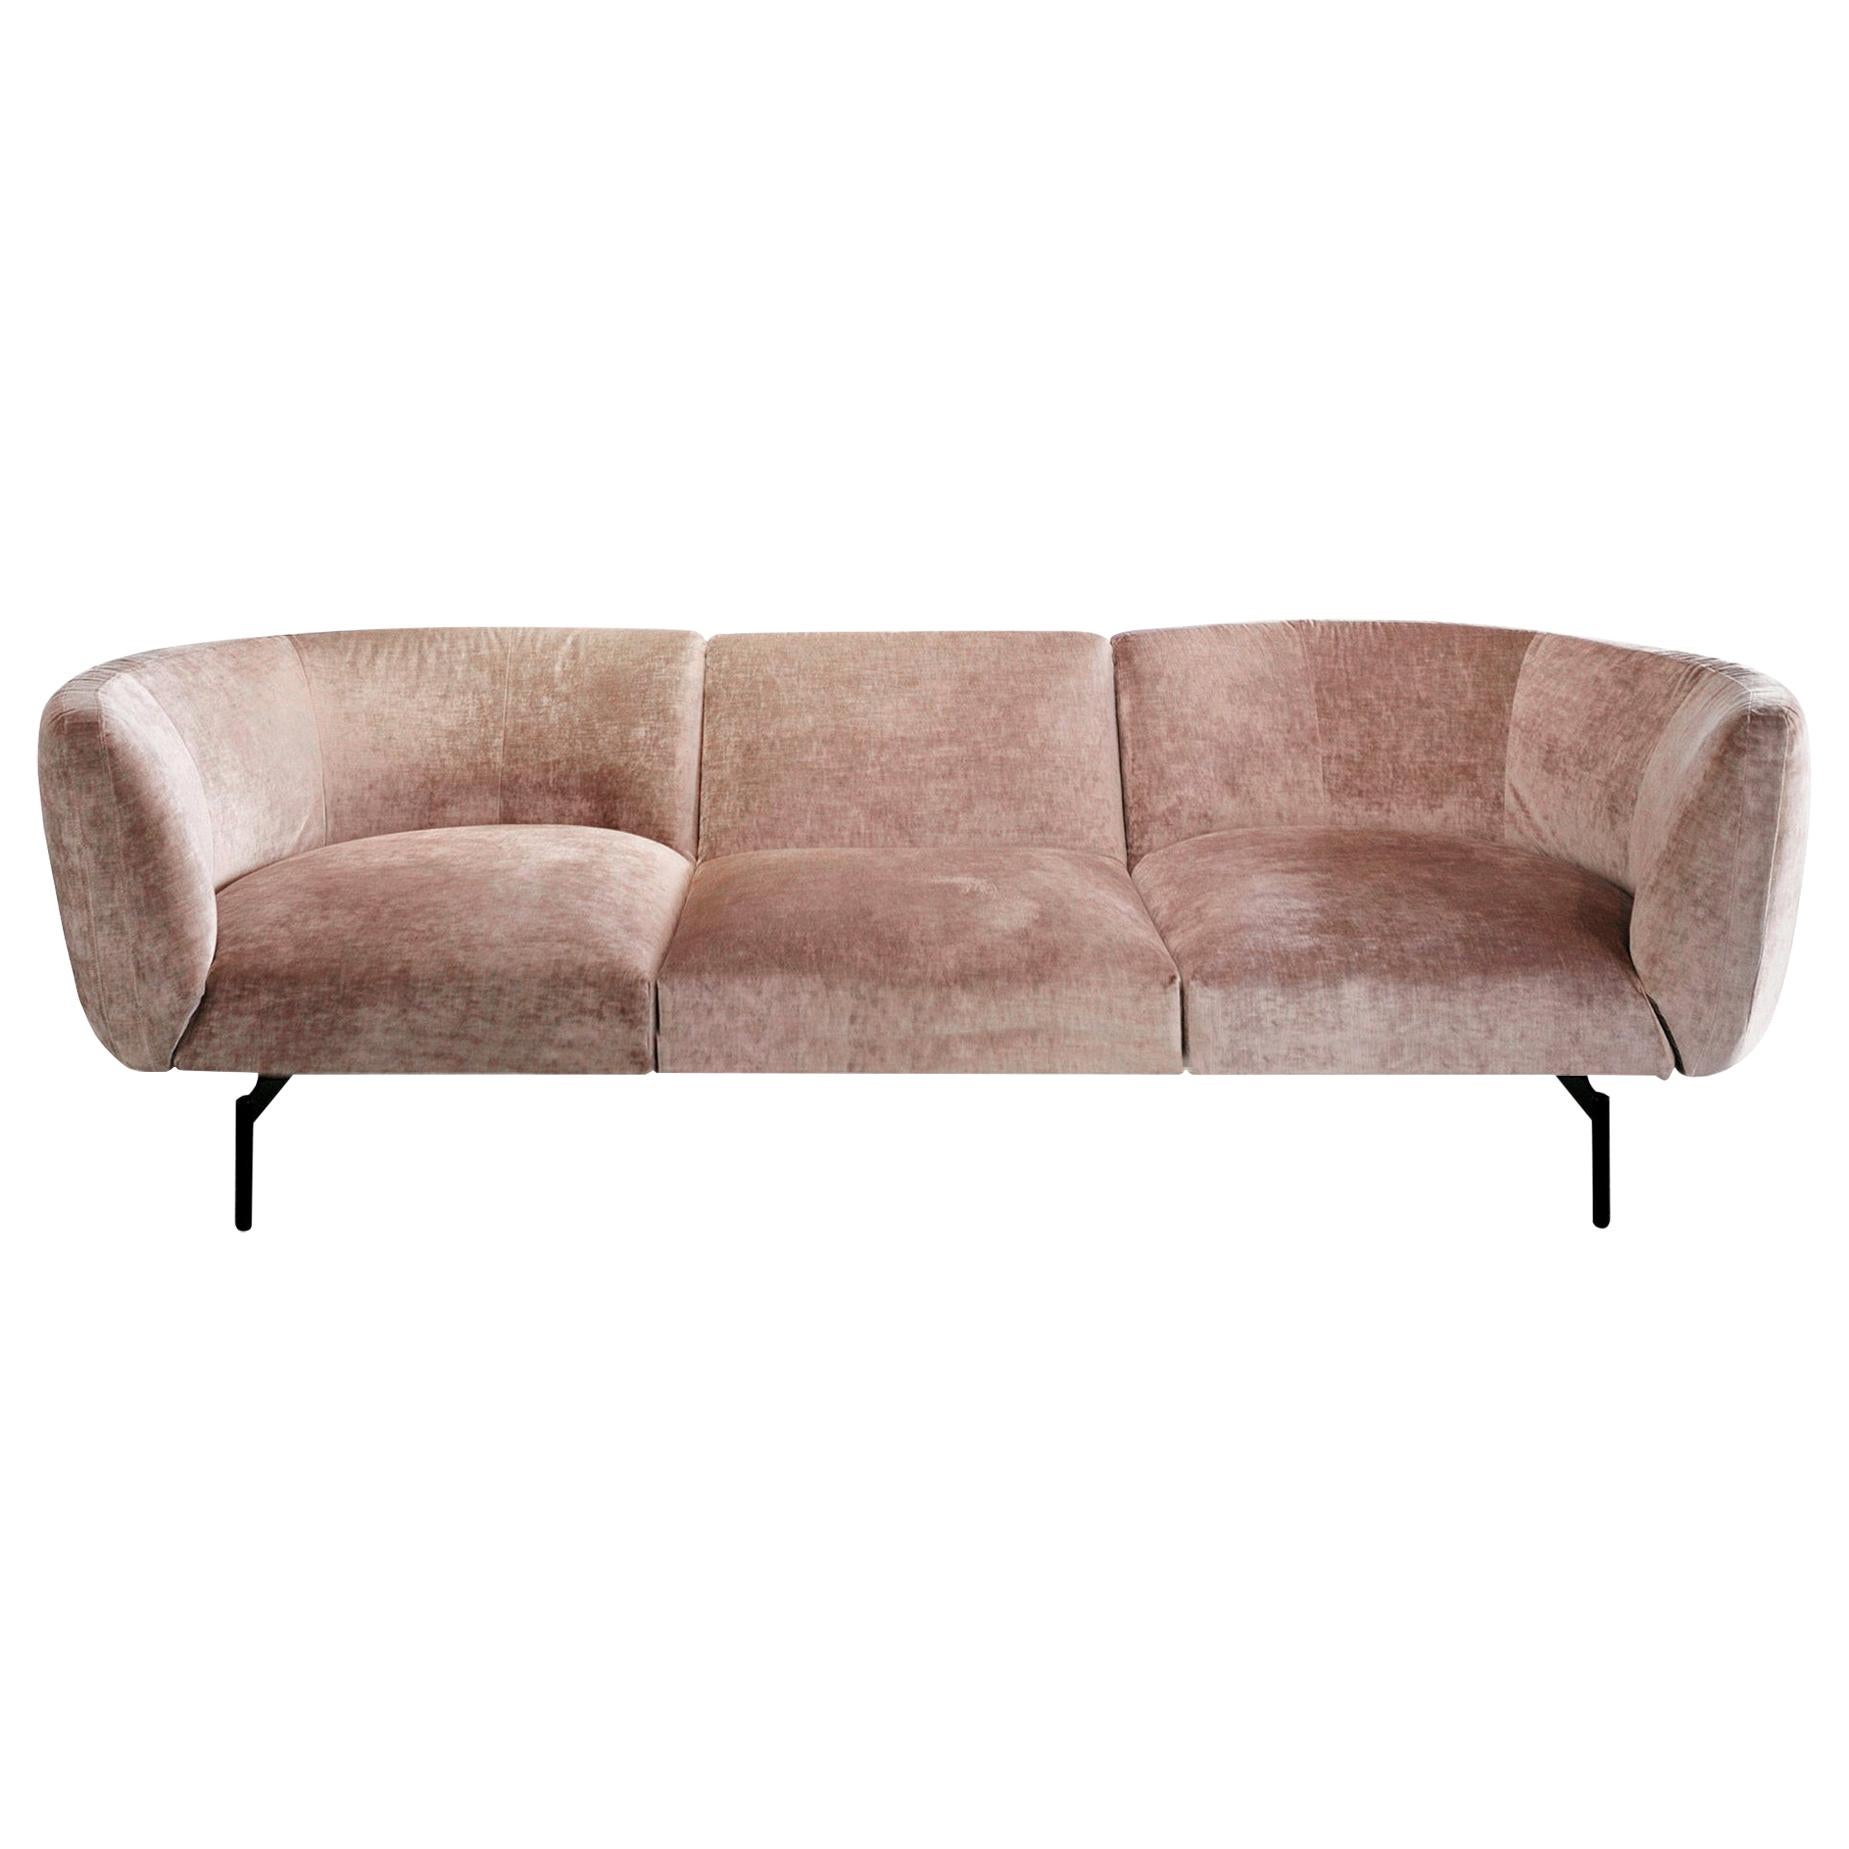 Pink Velvet Rendez-Vous Sofa, Designed by Sergio Bicego, Made in Italy